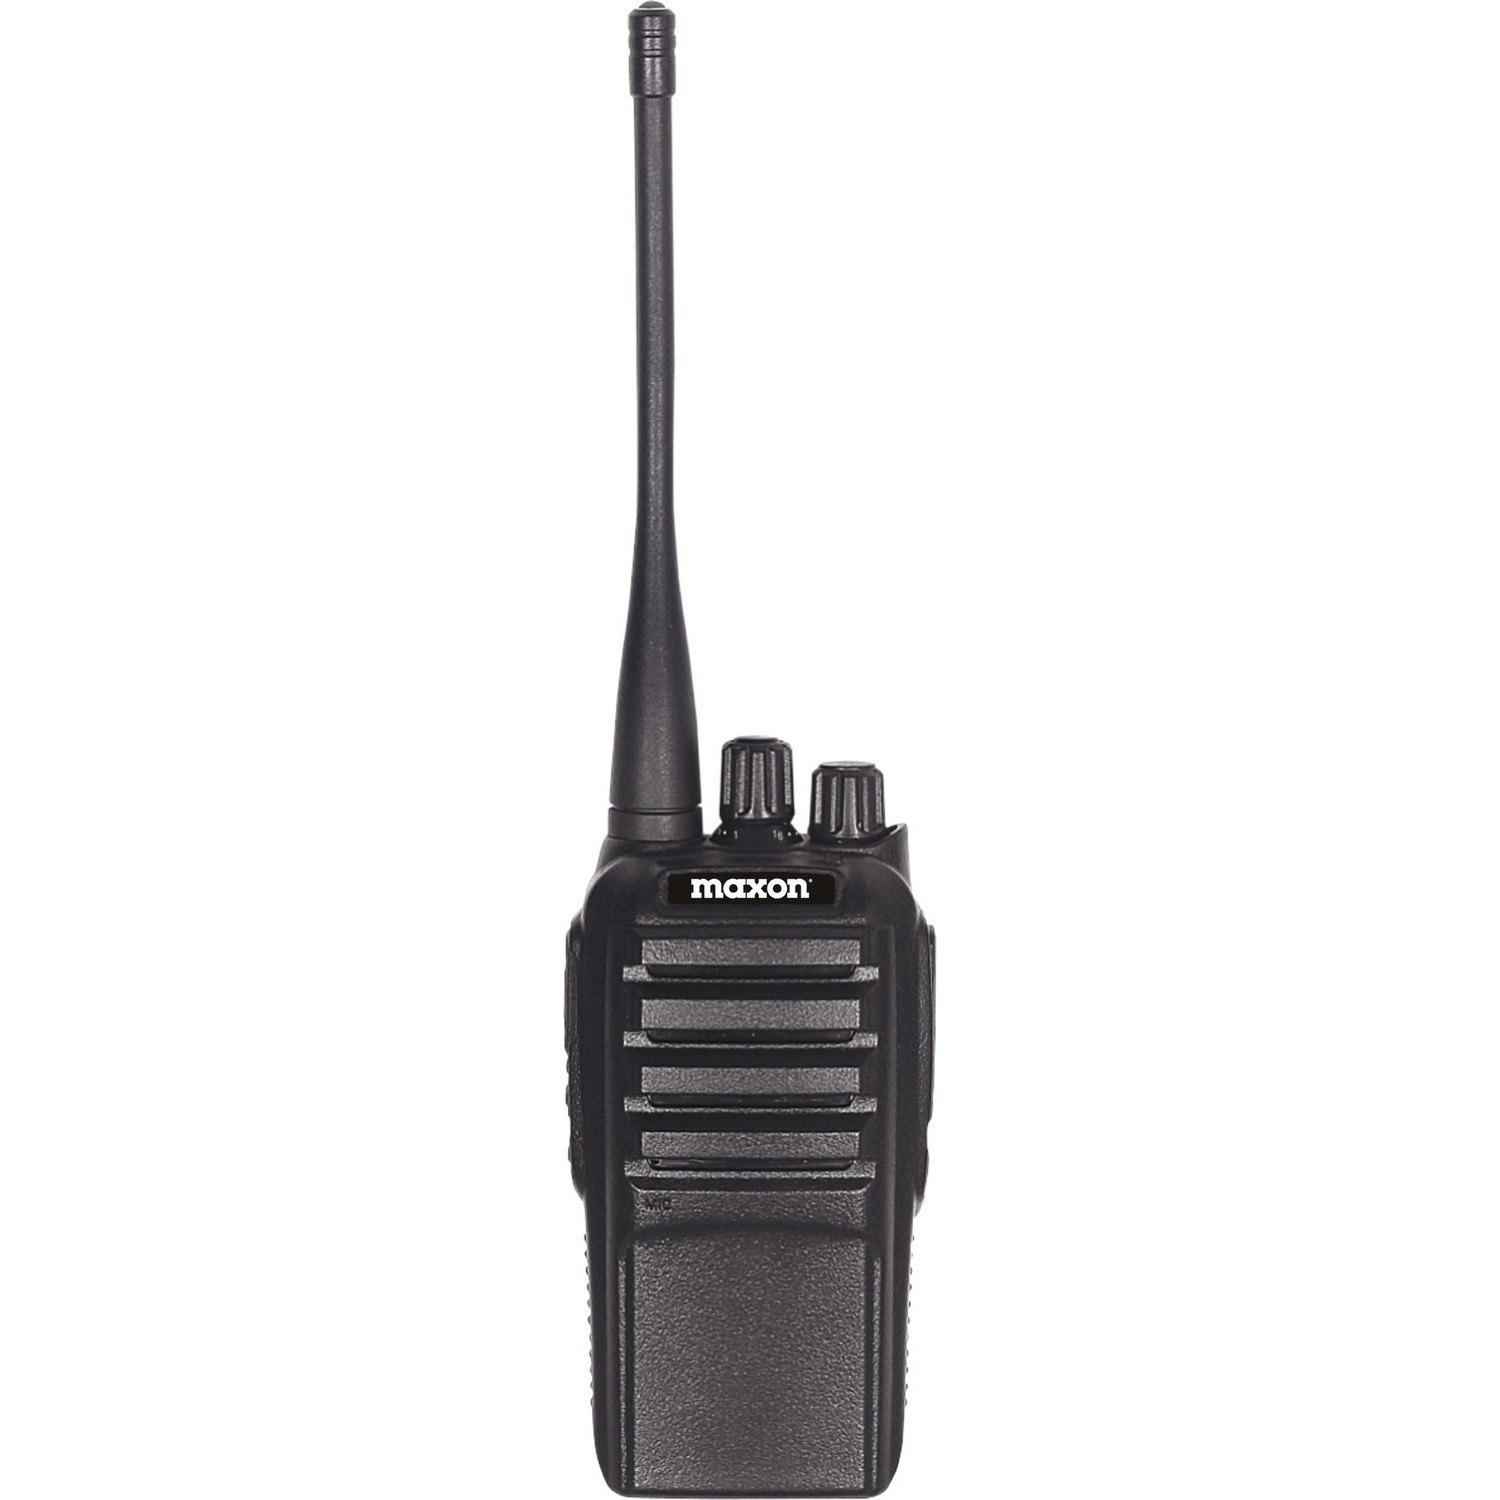 Maxon - Spartan 400-470 Mhz Vhf 4 Watt 16 Channel Professional Handheld Radio With Vox, Ctss/Dcs With Rechargeable Battery & Des